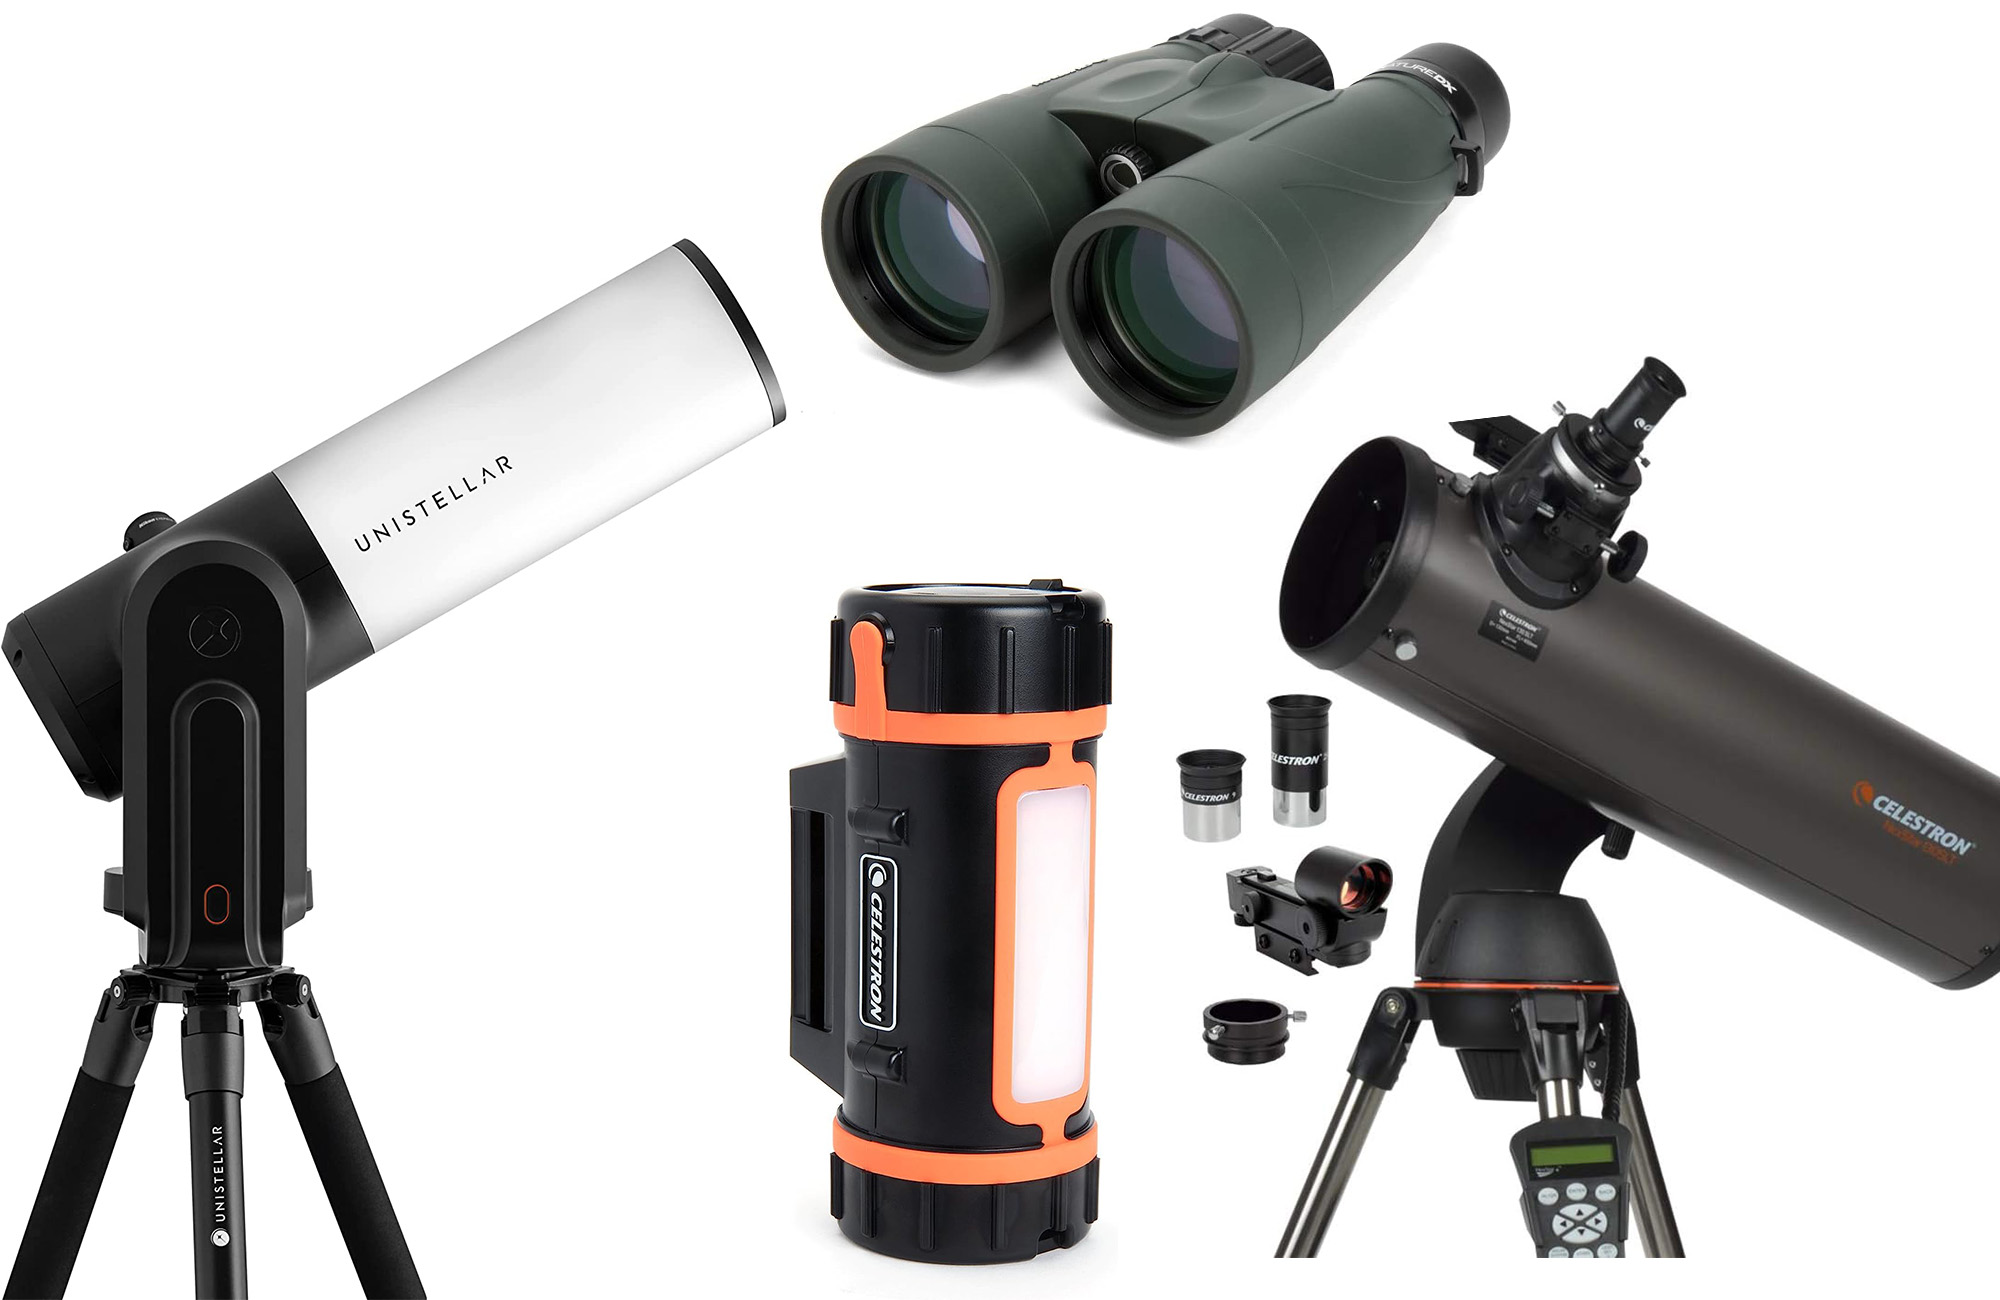 Save big with these Prime Day deals from Celestron and Unistellar.